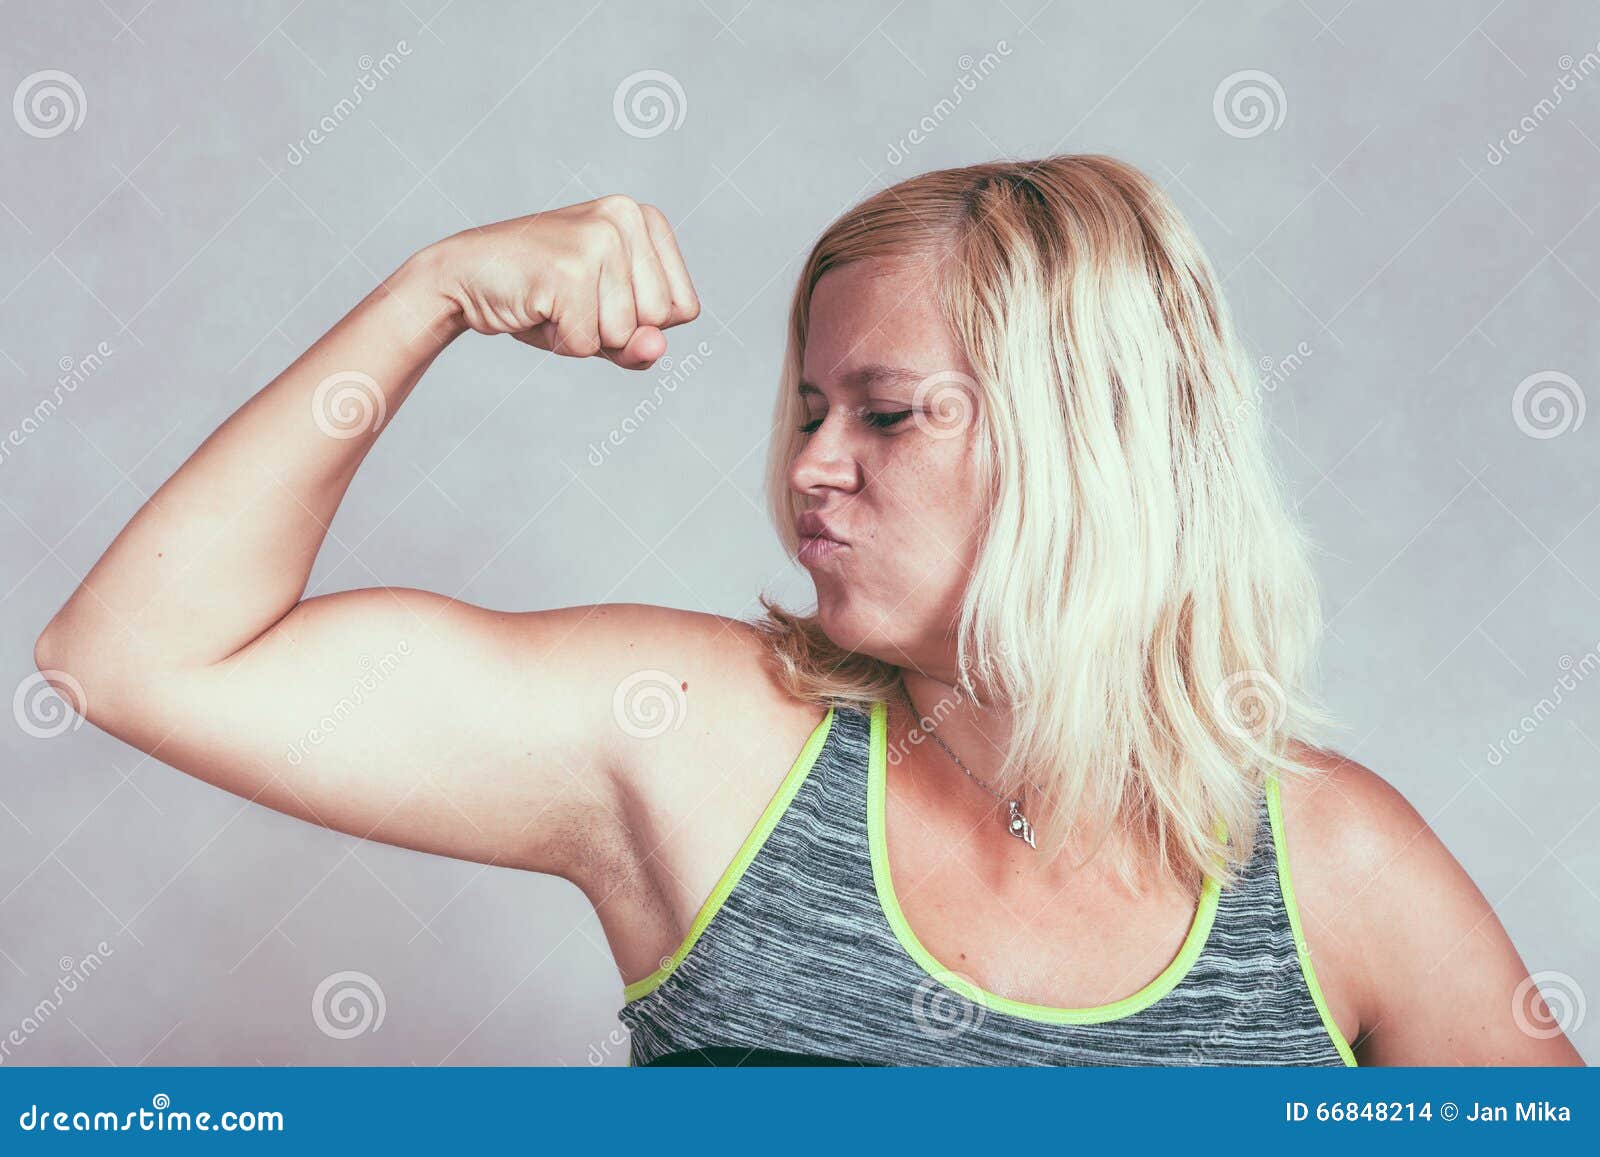 94,000+ Arm Muscle Woman Pictures